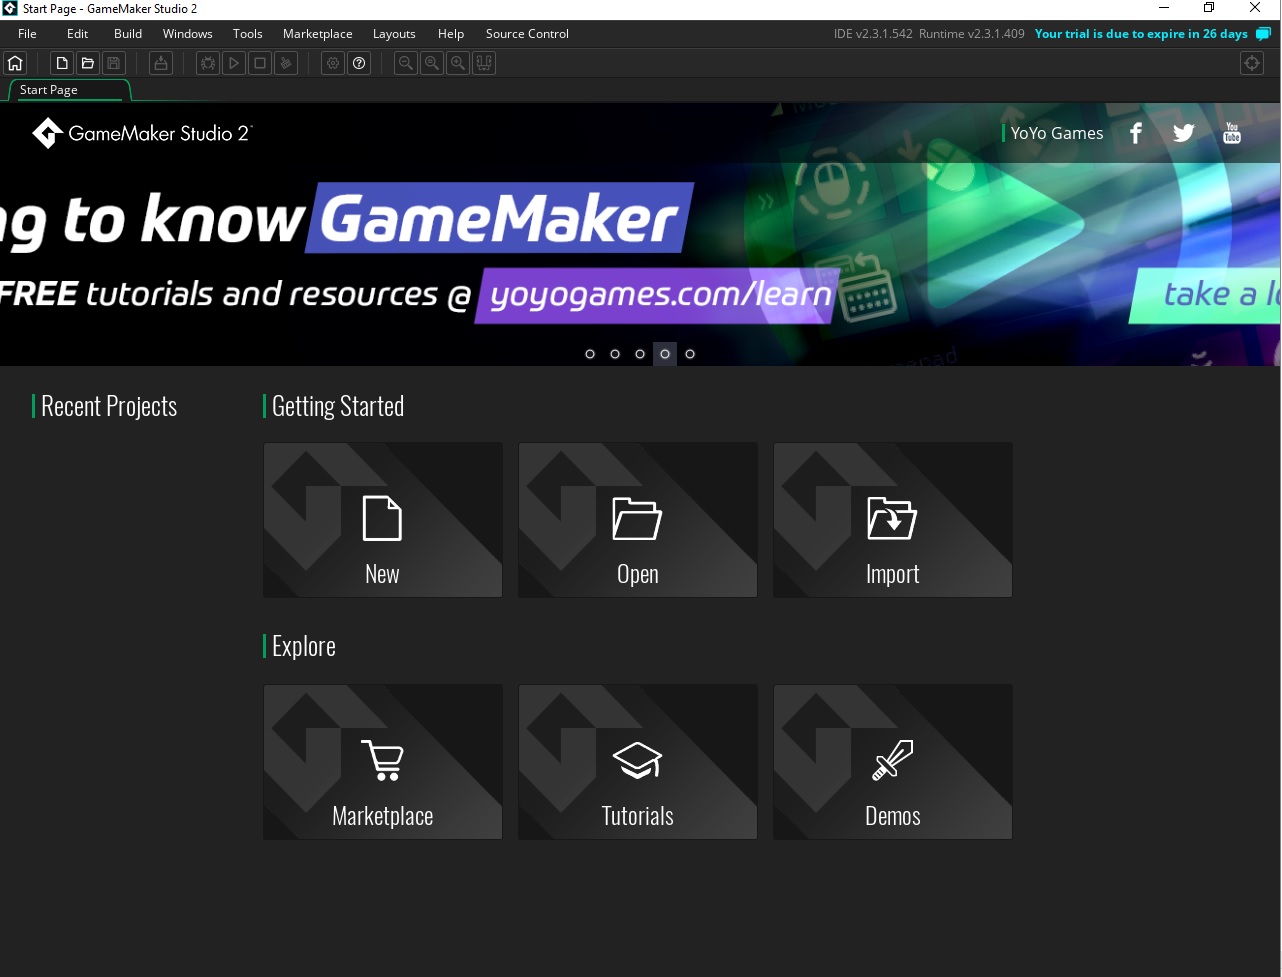 Gamemaker 2 is now free! Or is it? 